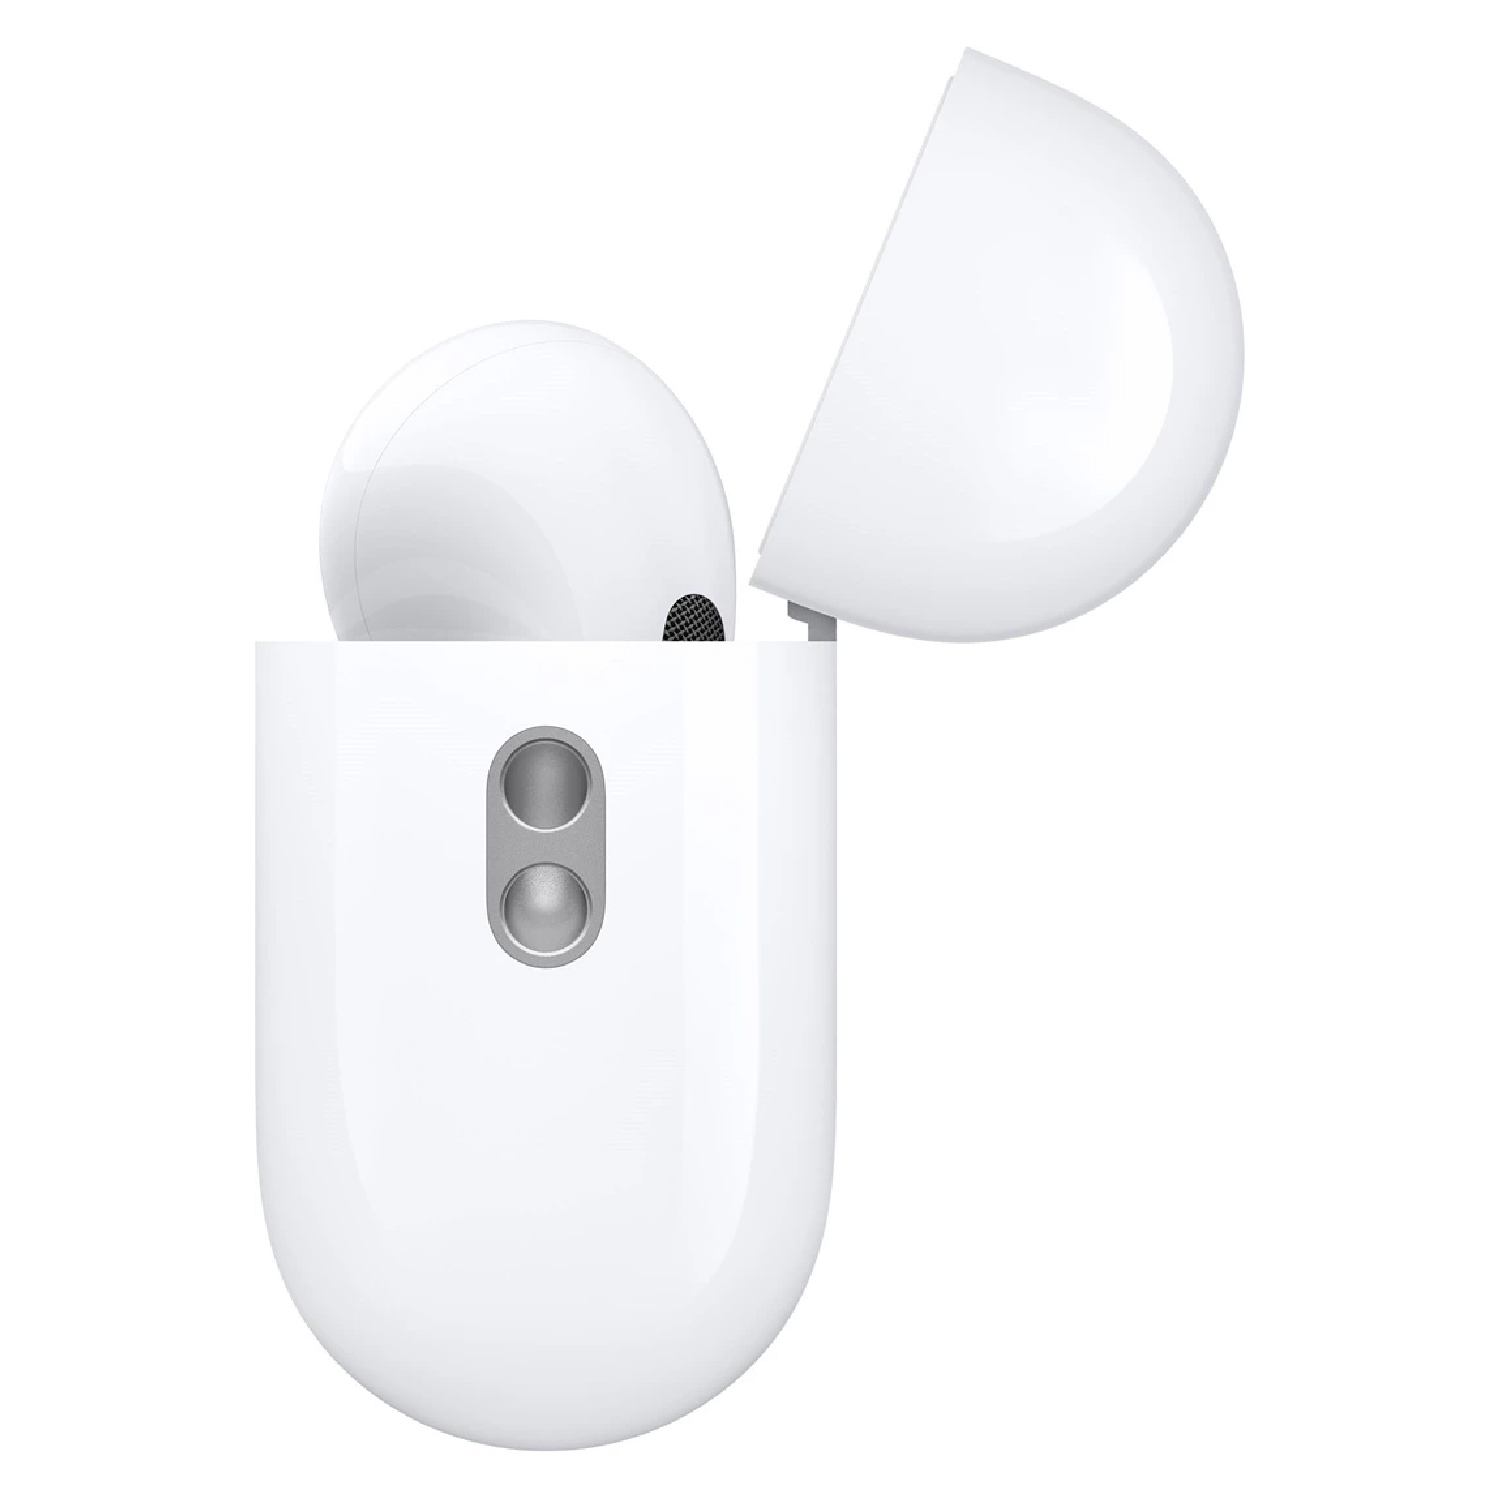 Generation 2. Apple AirPods Bluetooth MagSafe AirPods Pro APPLE In-ear whitesmoke weiß, Ladecase,